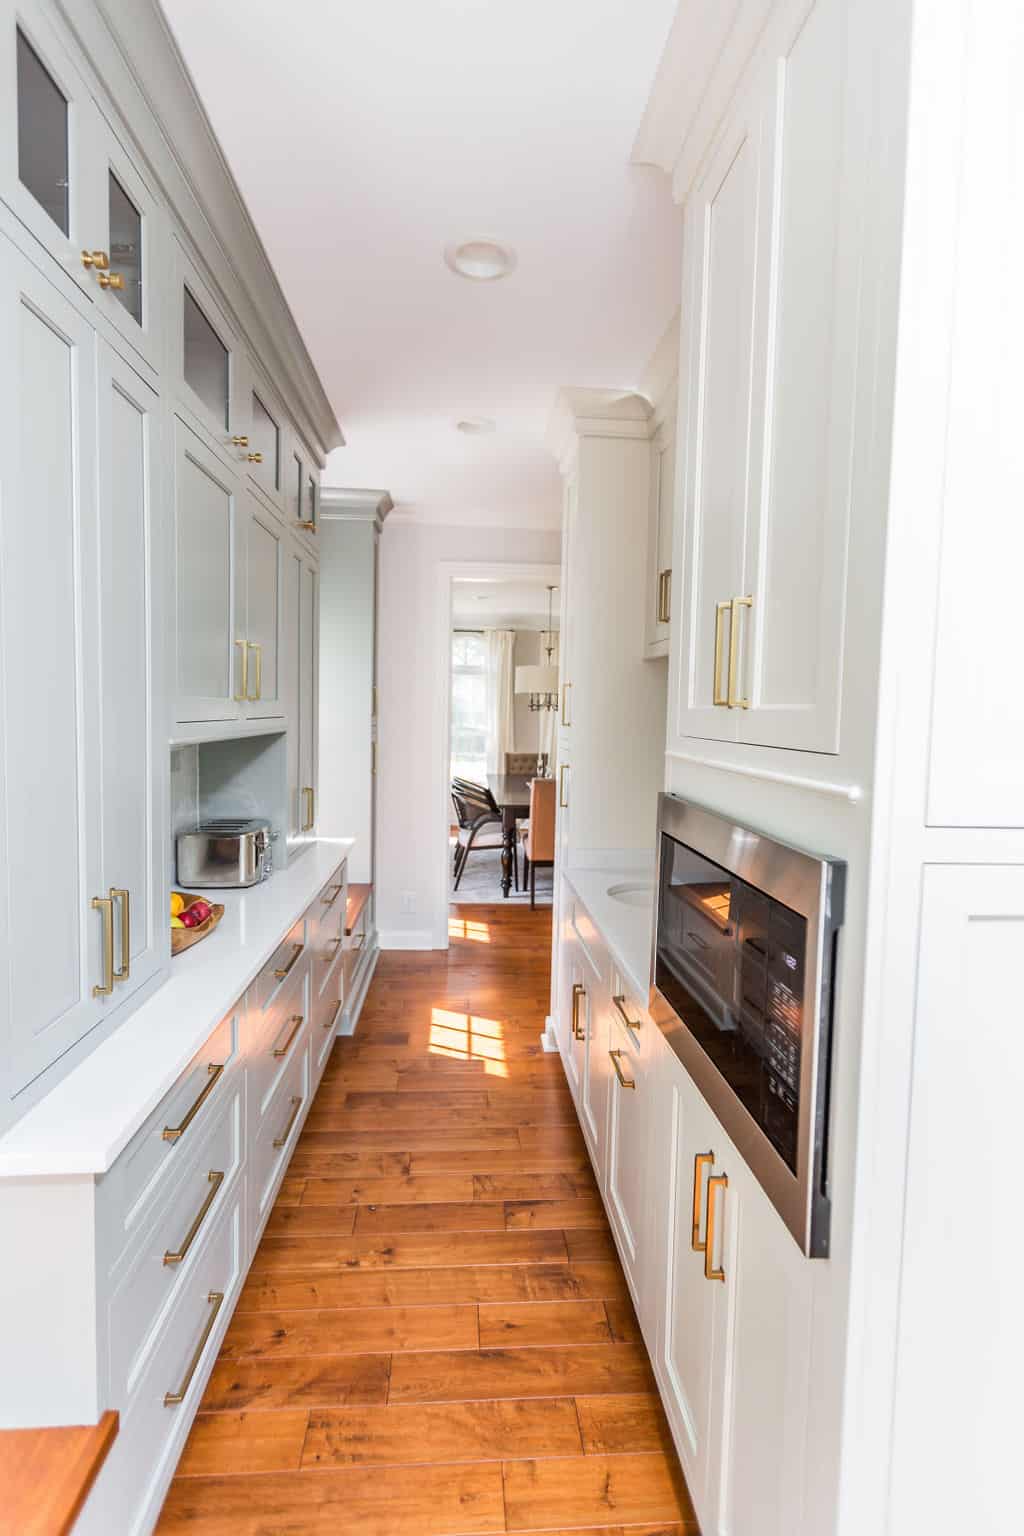 Nicholas Design Build | Remodel the kitchen with white cabinets and wood floors.